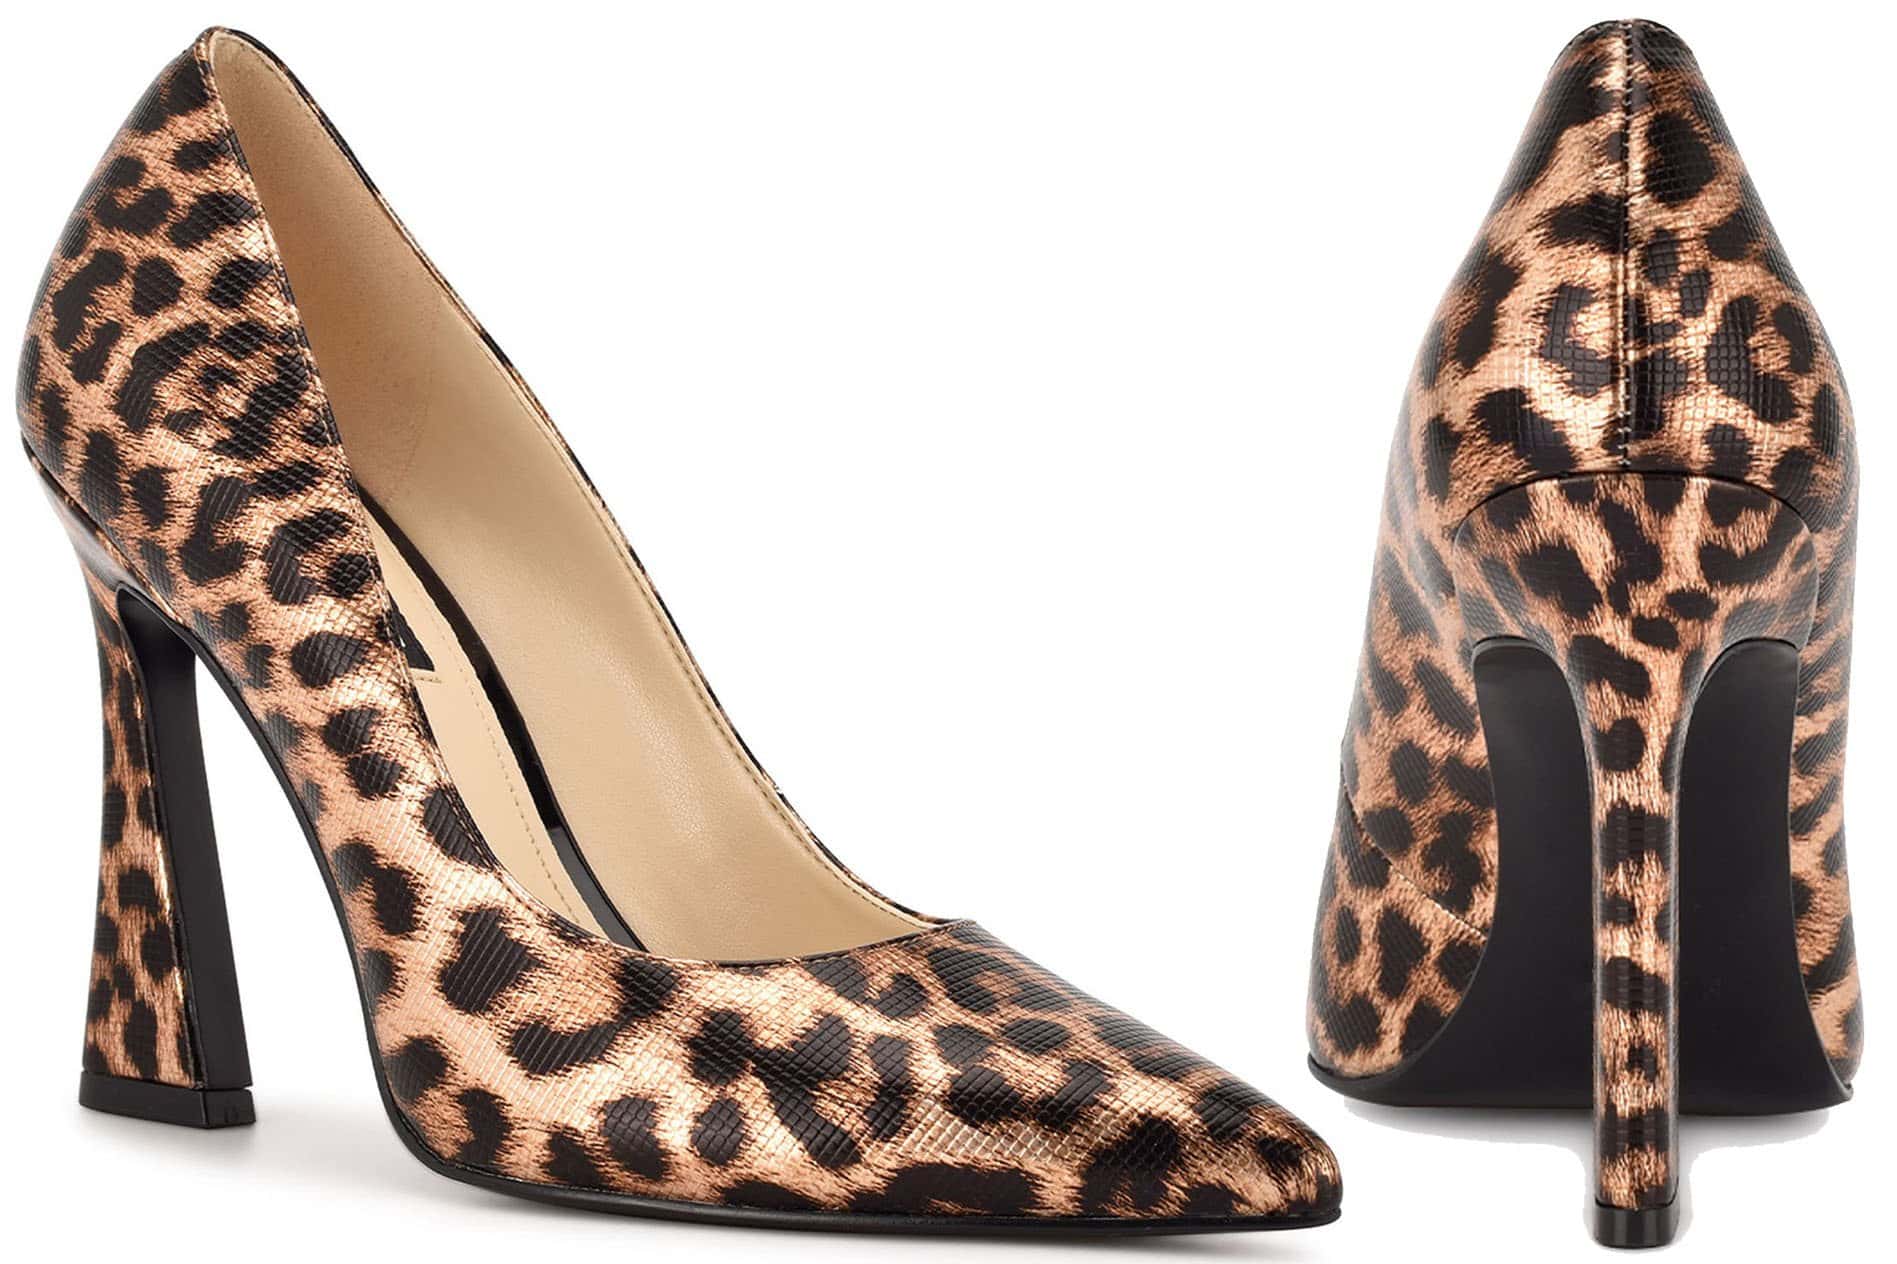 Featuring irregular, clustered rosettes, you can easily pair Nine West's leopard-print shoes with dresses or jeans